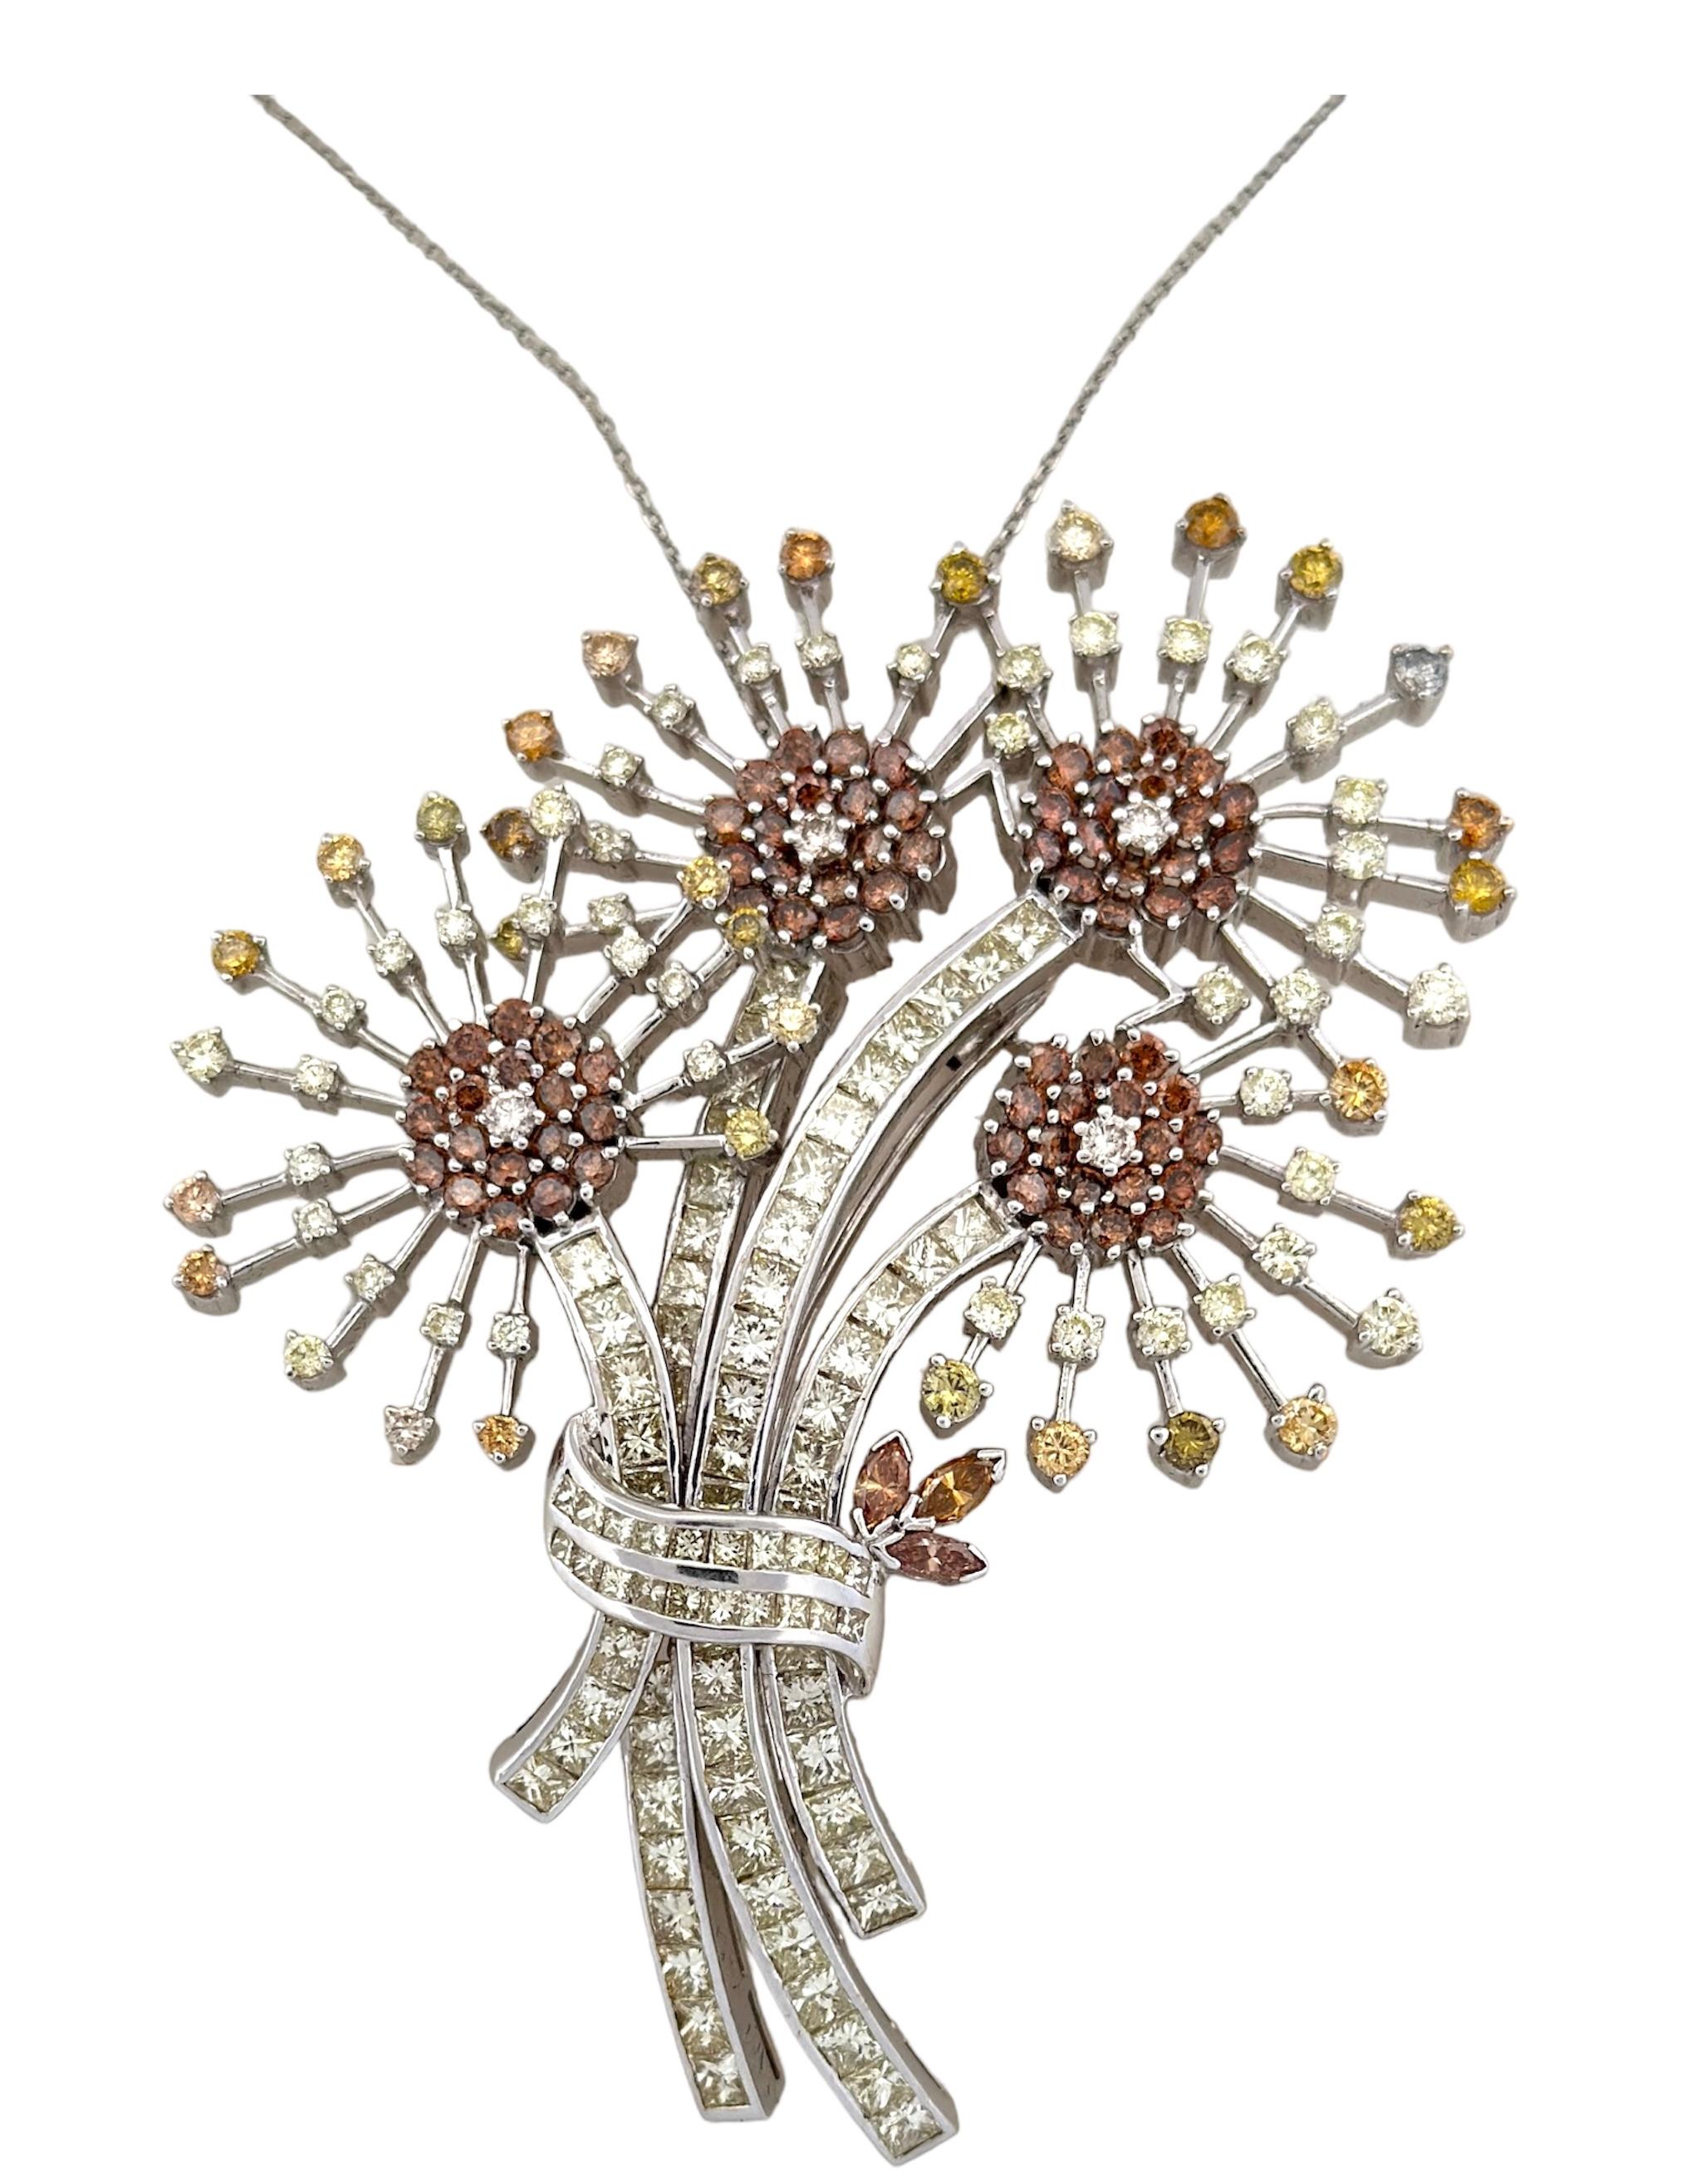 This exquisite Pink, Yellow, and White Diamond Bouquet Brooch Pendant hails from the early 20th century, encapsulating the timeless elegance of that era. Adorned with a sumptuous total diamond weight of 13.91 carats, this remarkable piece is a